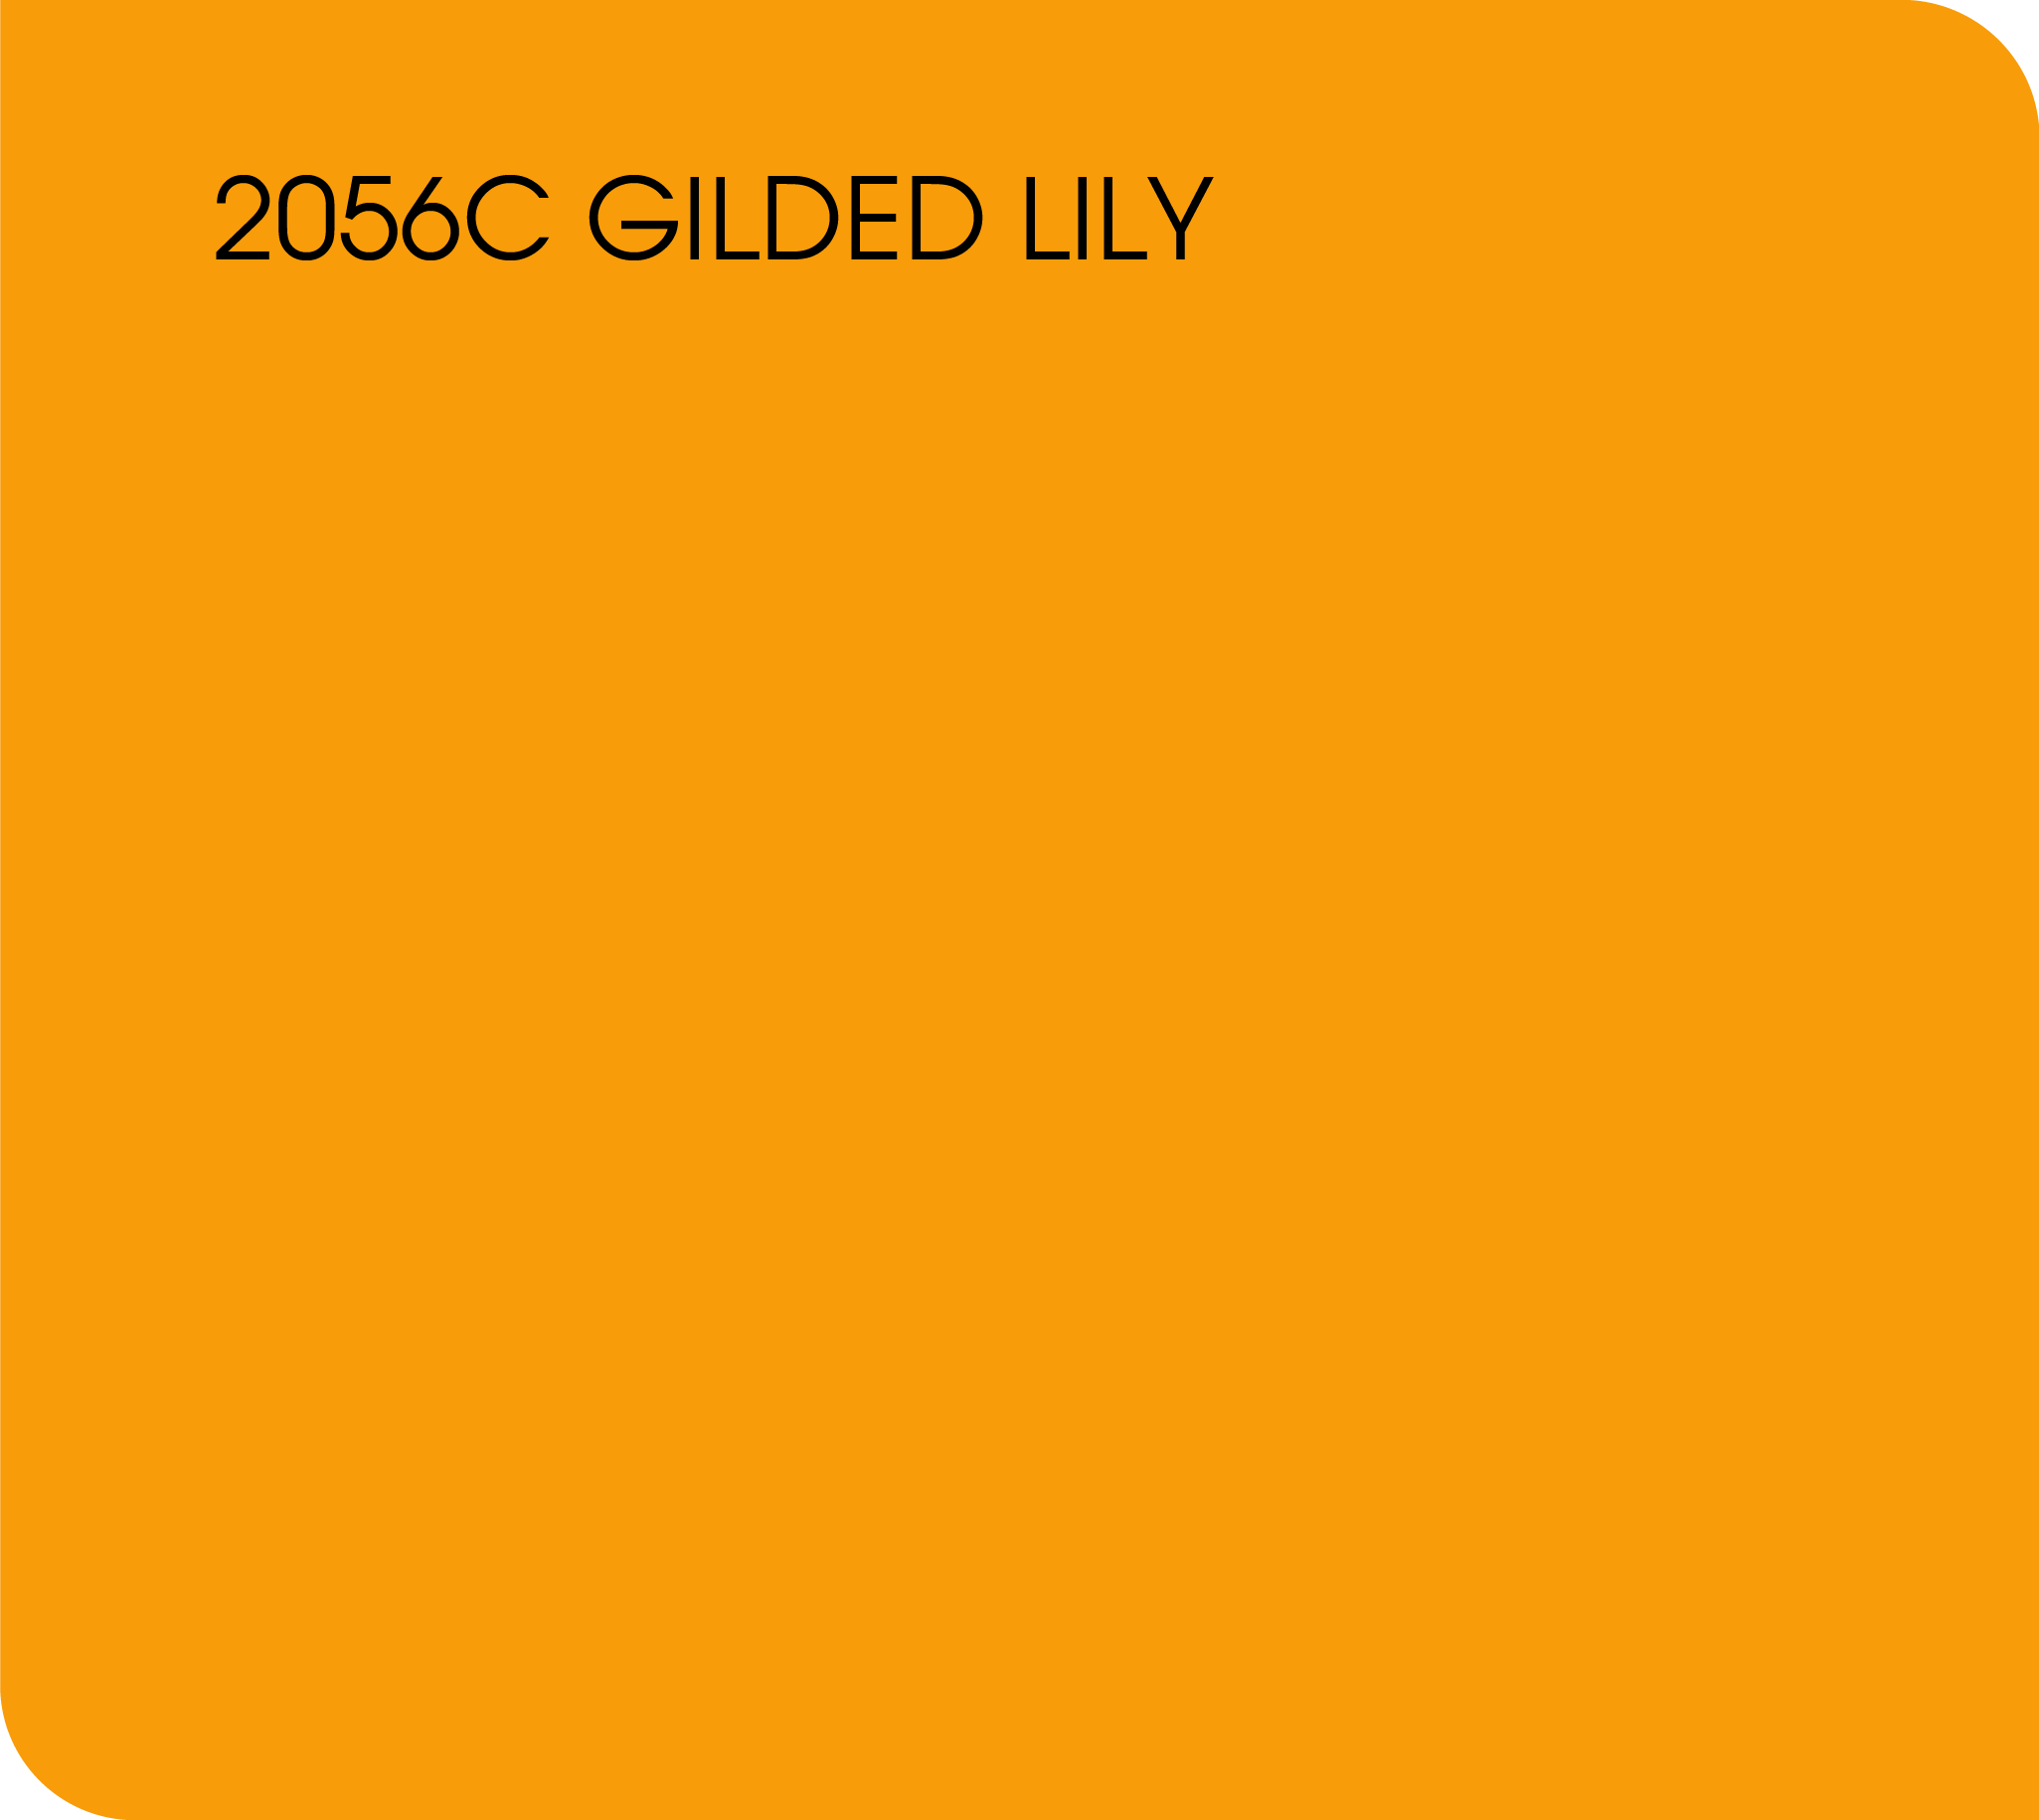 gilded lily